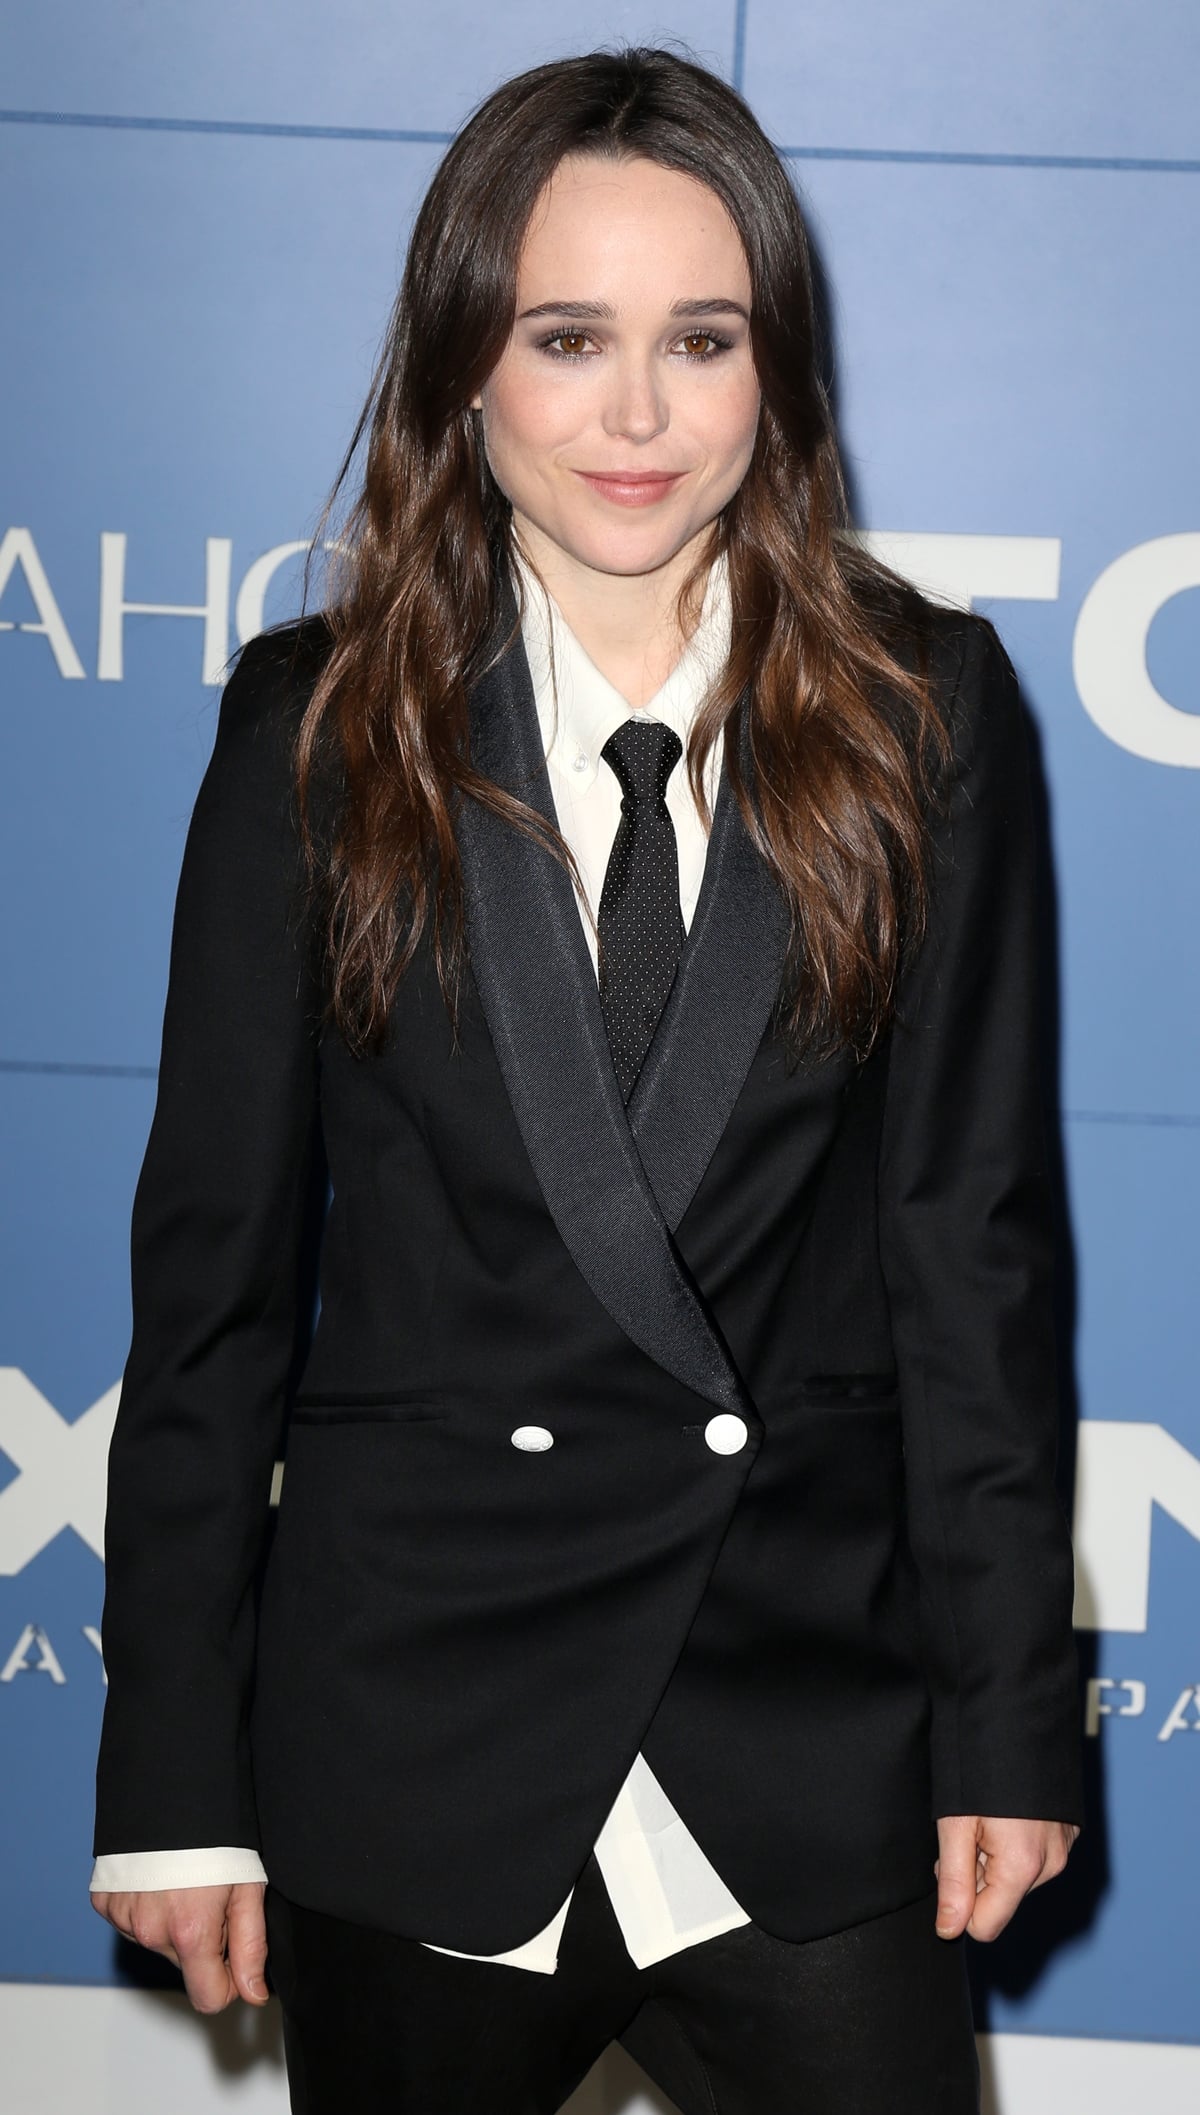 Ellen (Elliot) Page in a Band of Outsiders blazer and a Marissa Webb blouse at the "X-Men: Days Of Future Past" world premiere